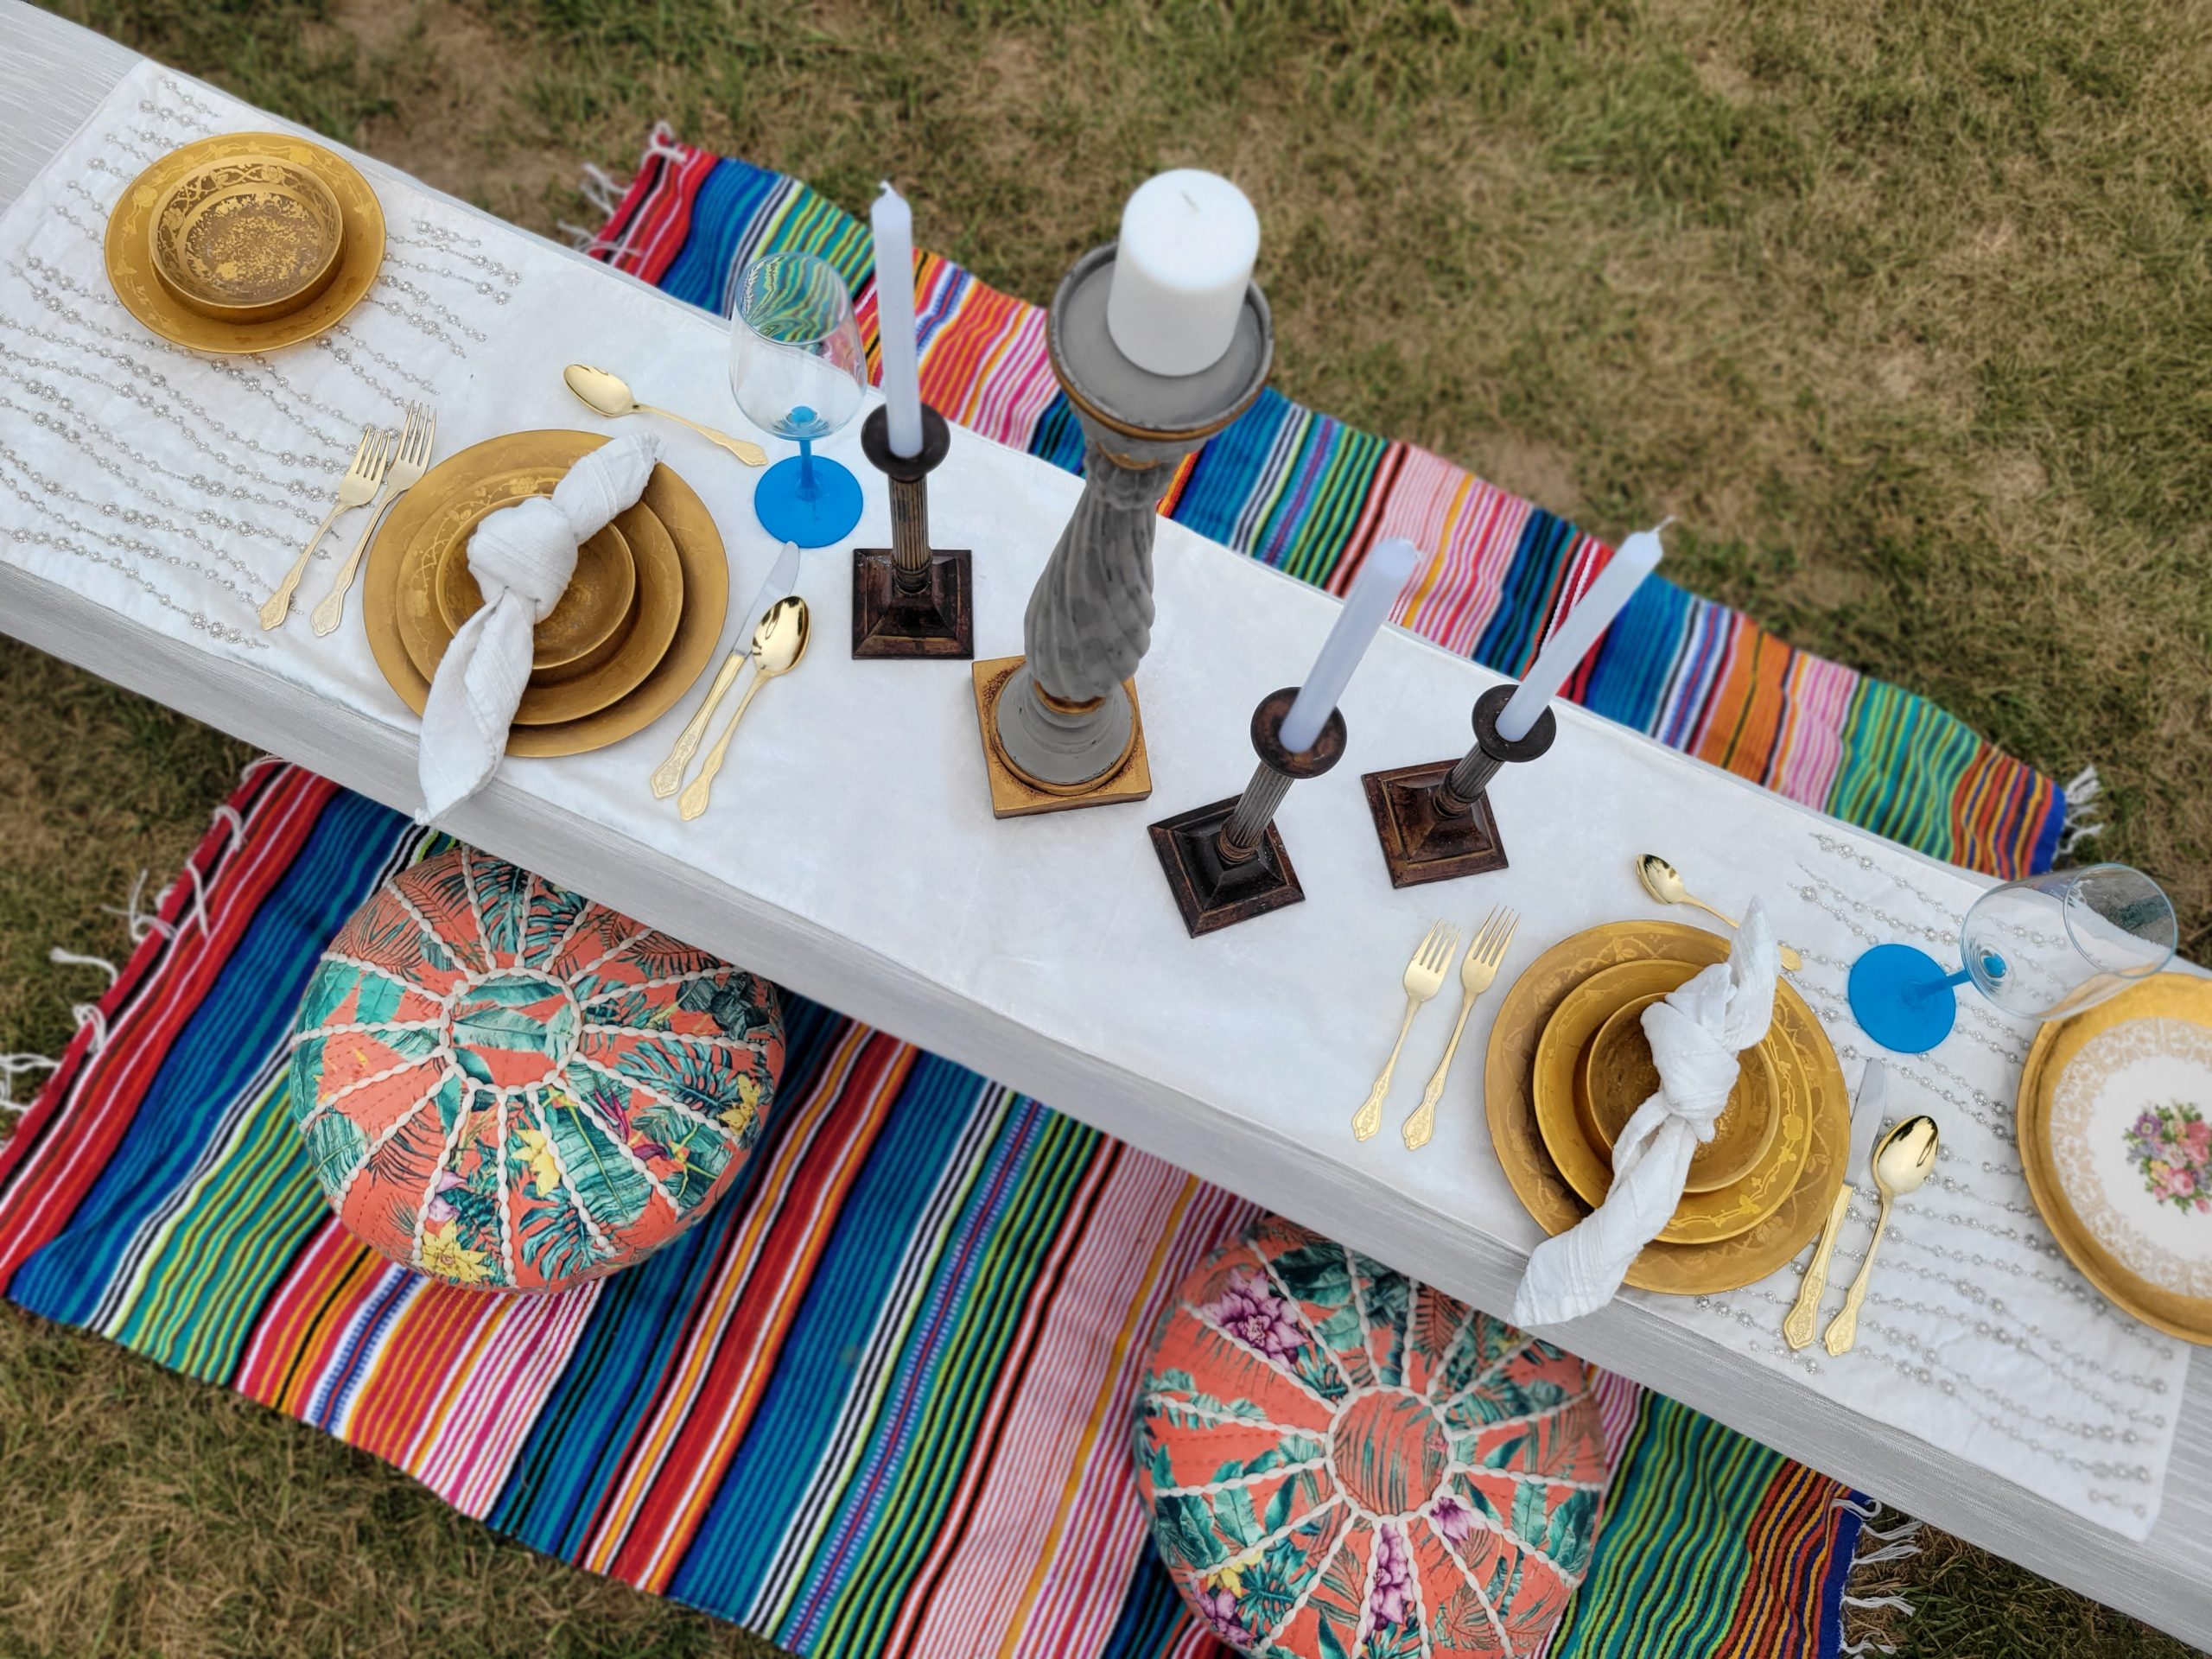 Table set up for luxury picnic